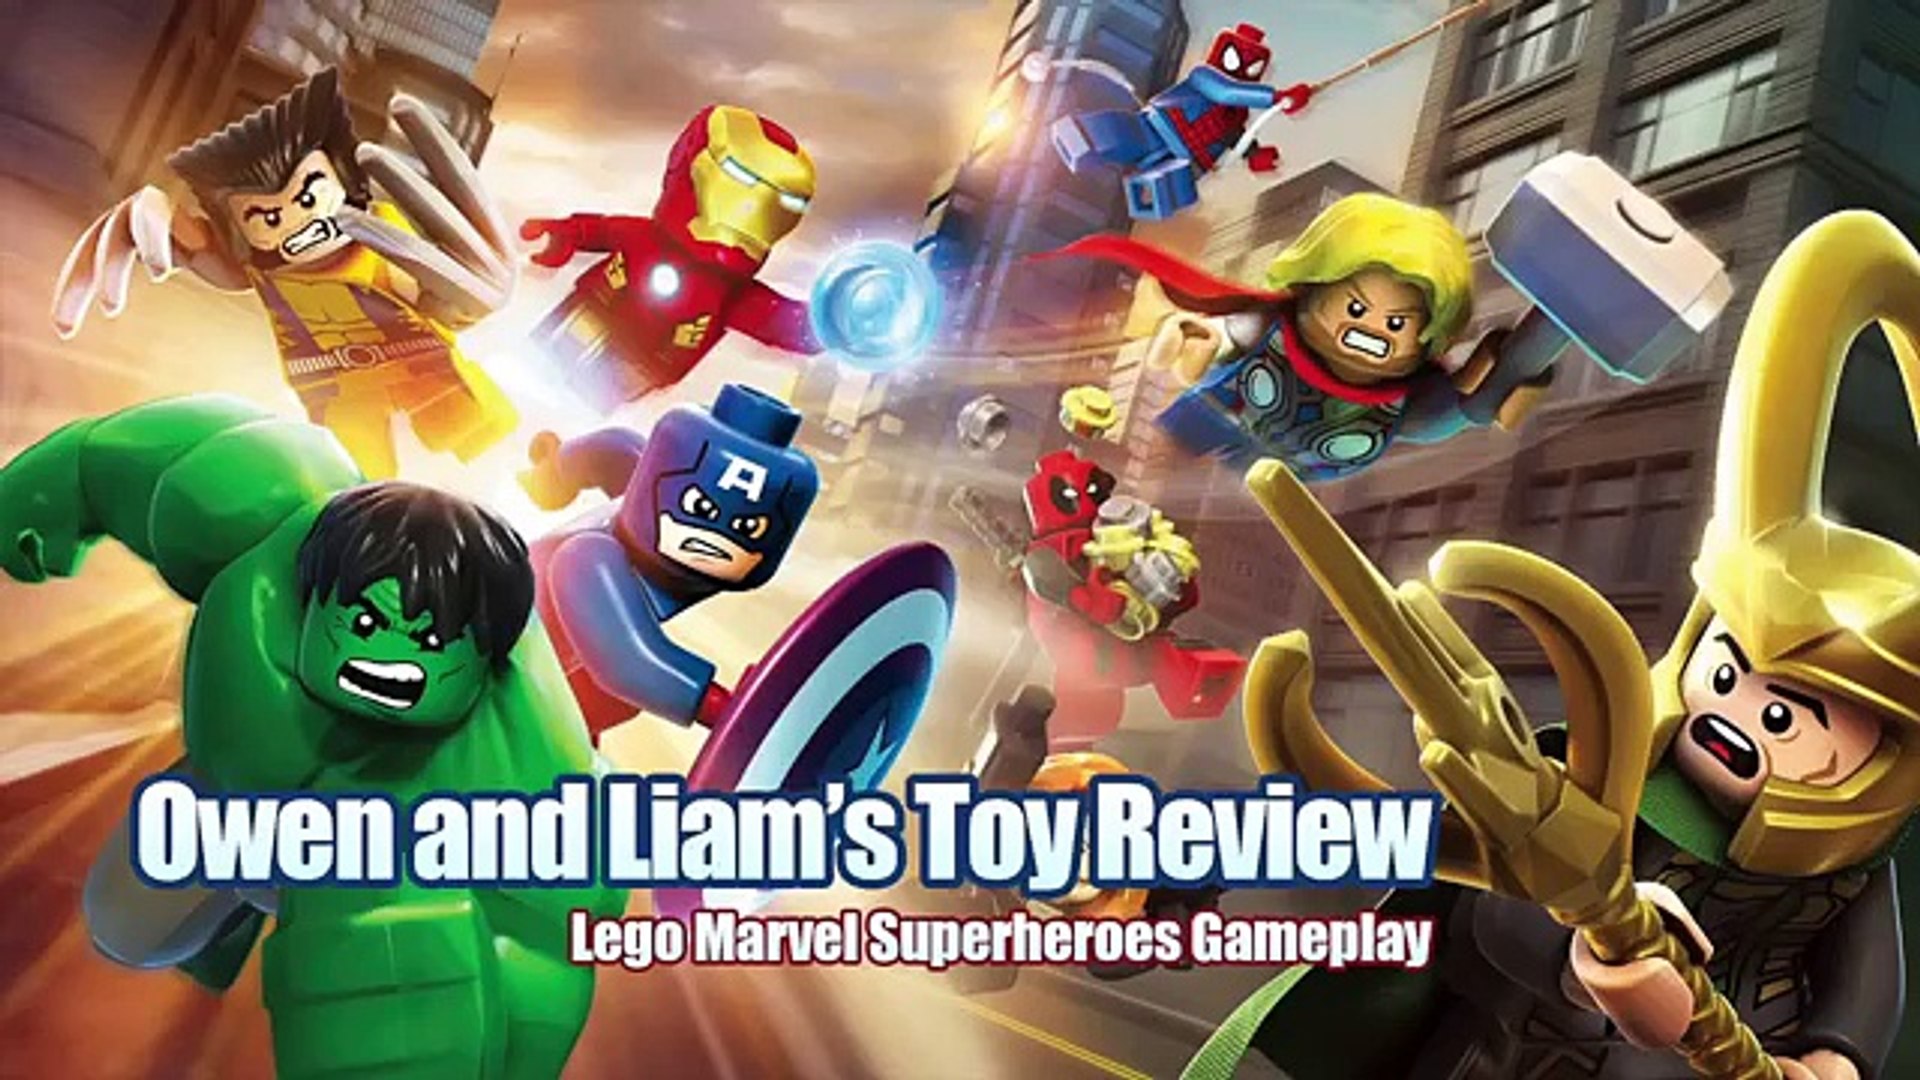 Lego Marvel Superheroes Gameplay - Owen and Liams Toy Review - video  Dailymotion